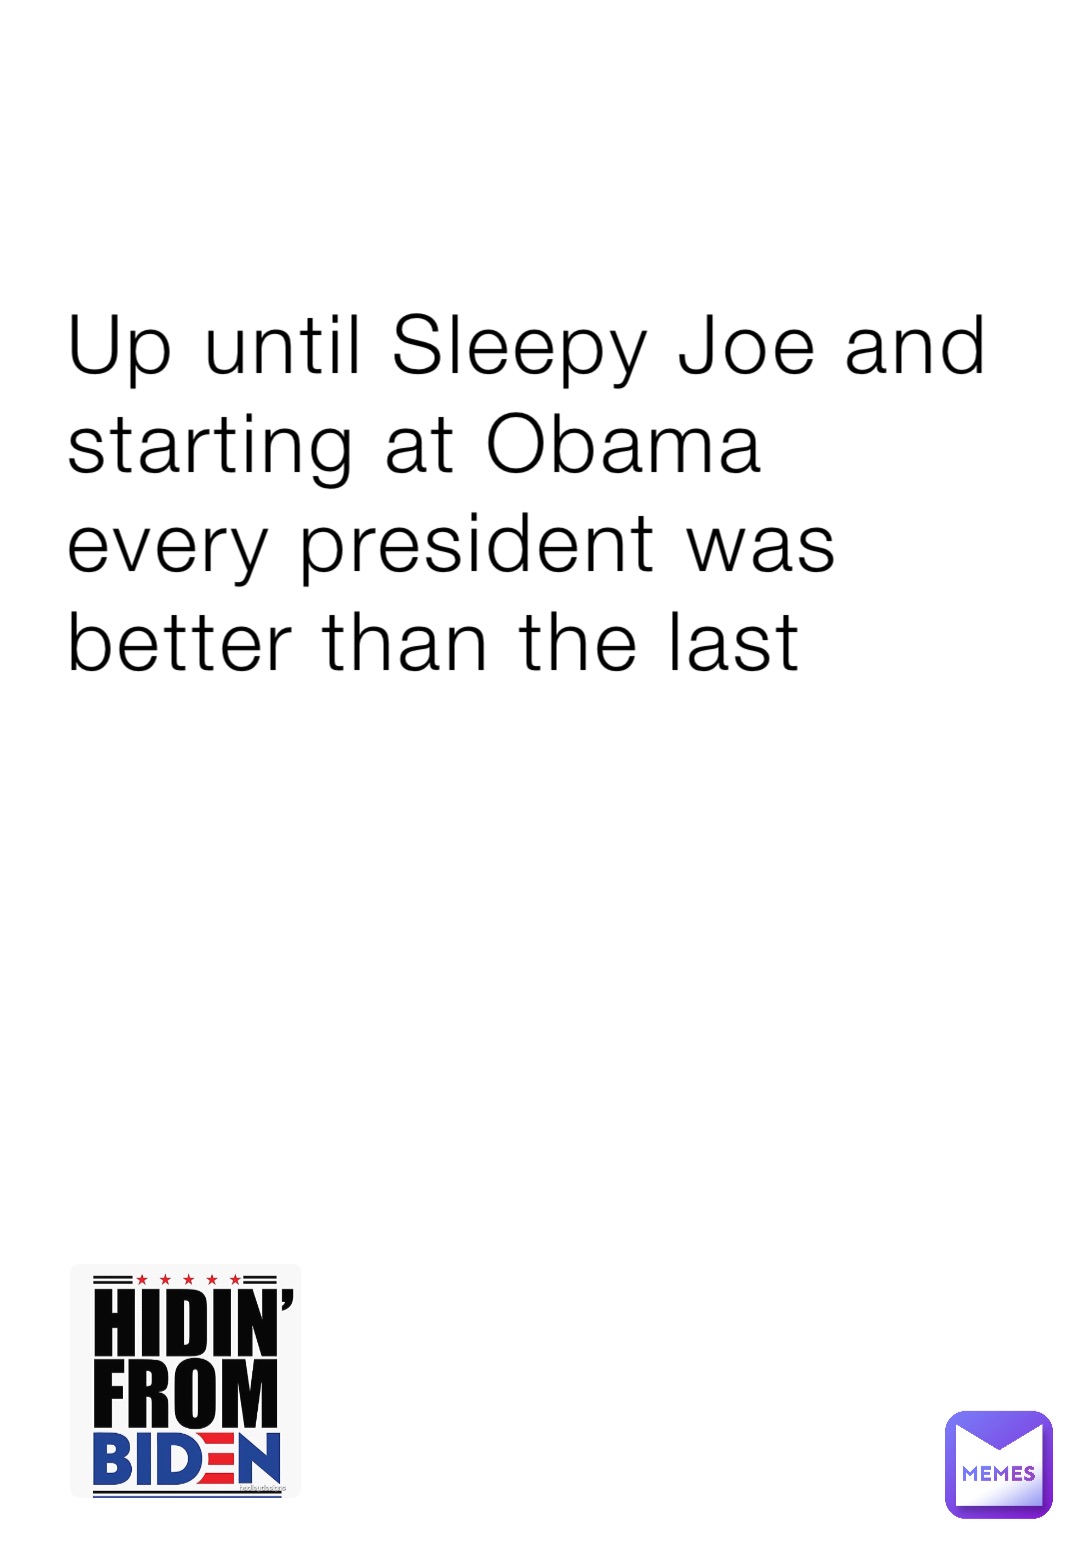 Up until Sleepy Joe and starting at Obama every president was better than the last